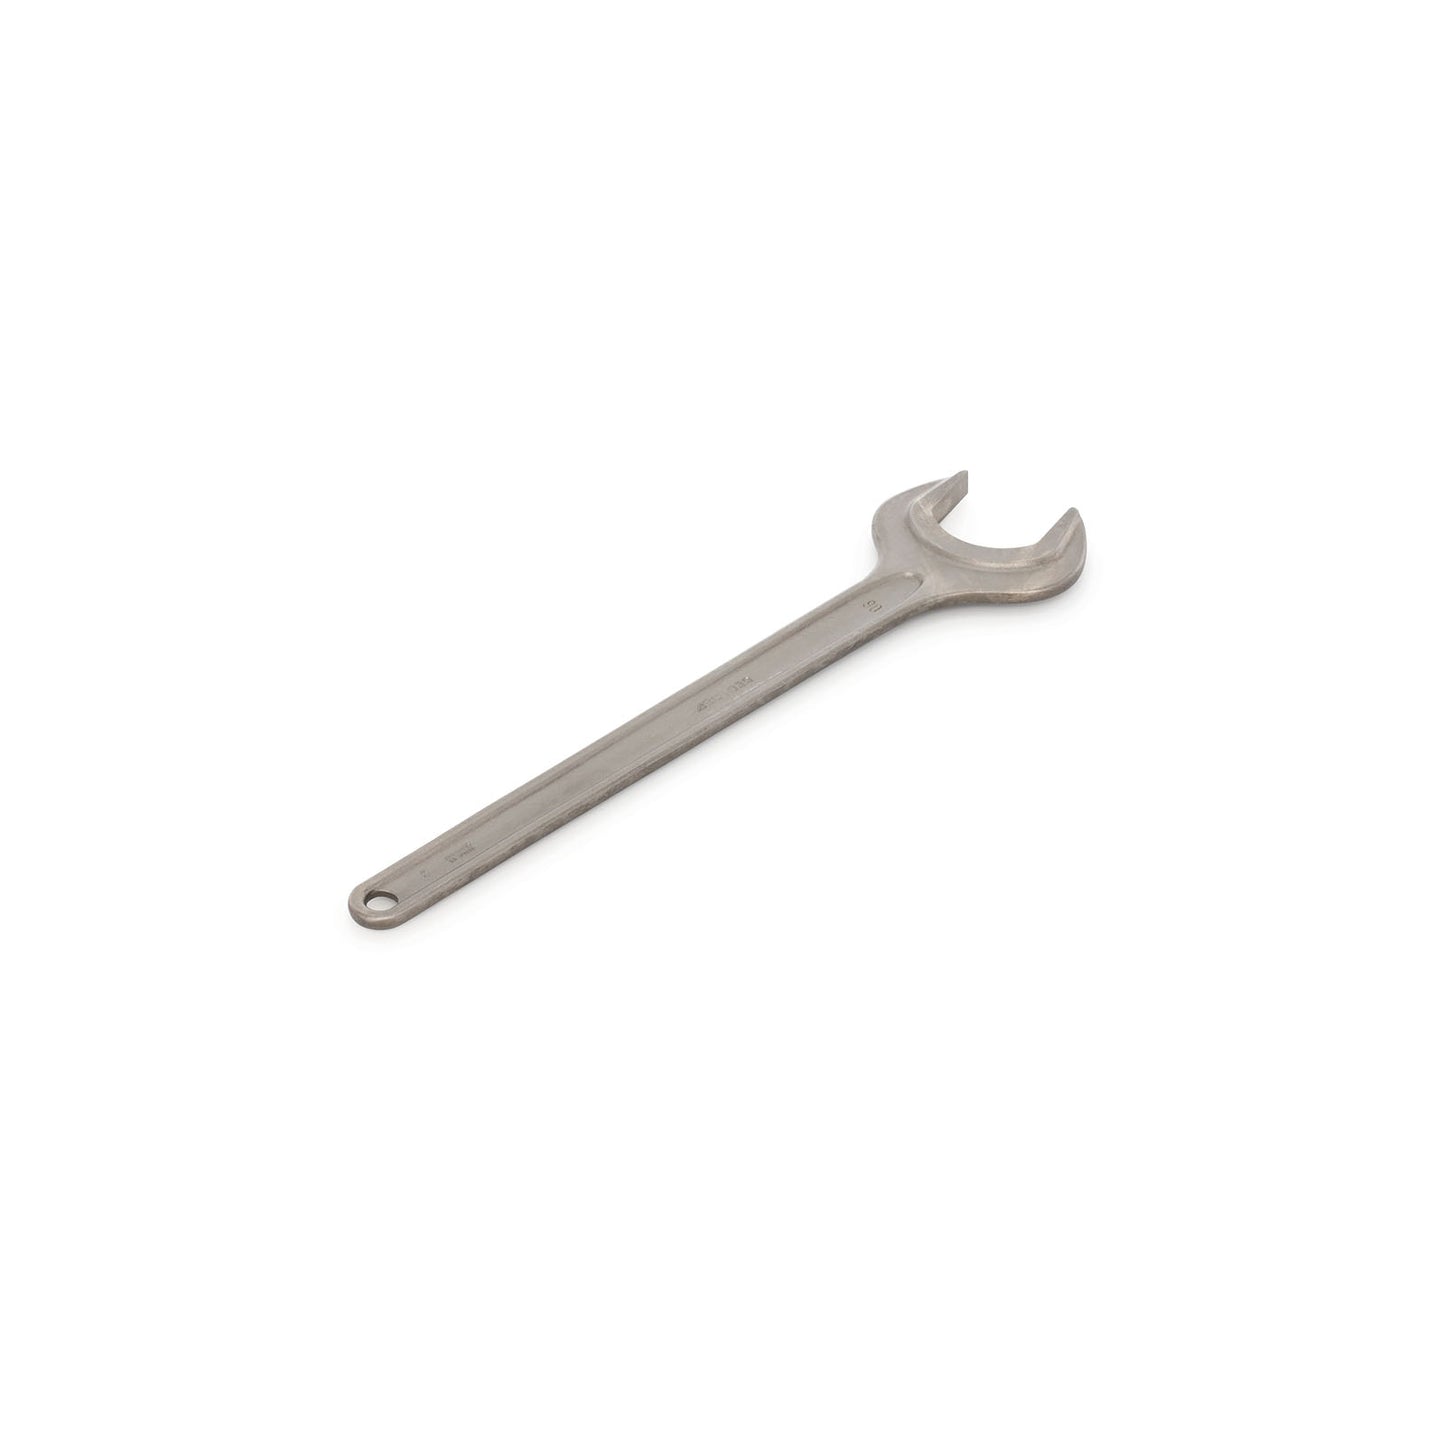 GEDORE 894 90 - 1 Open End Wrench, 90mm (6578080)